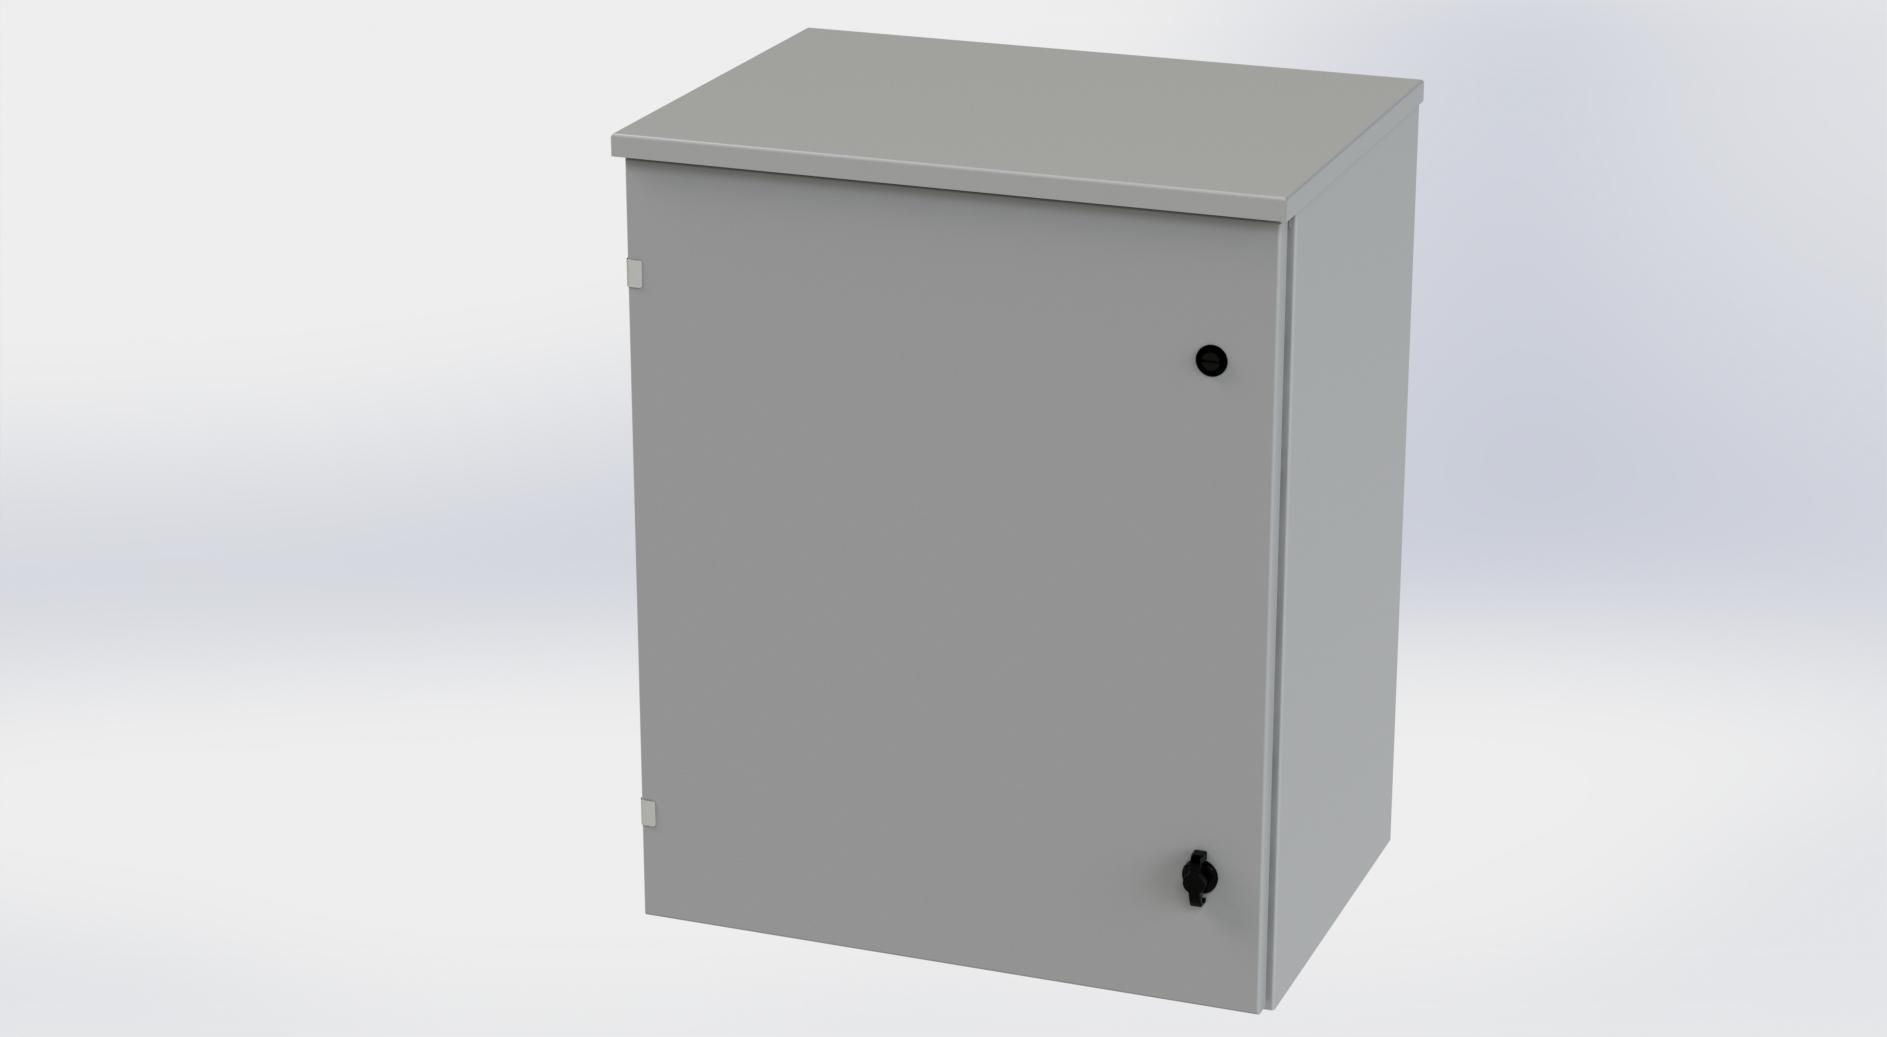 Saginaw Control SCE-30R2416LP Type-3R Hinged Cover Enclosure, Height:30.00", Width:24.00", Depth:16.00", ANSI-61 gray powder coating inside and out. Optional sub-panels are powder coated white.